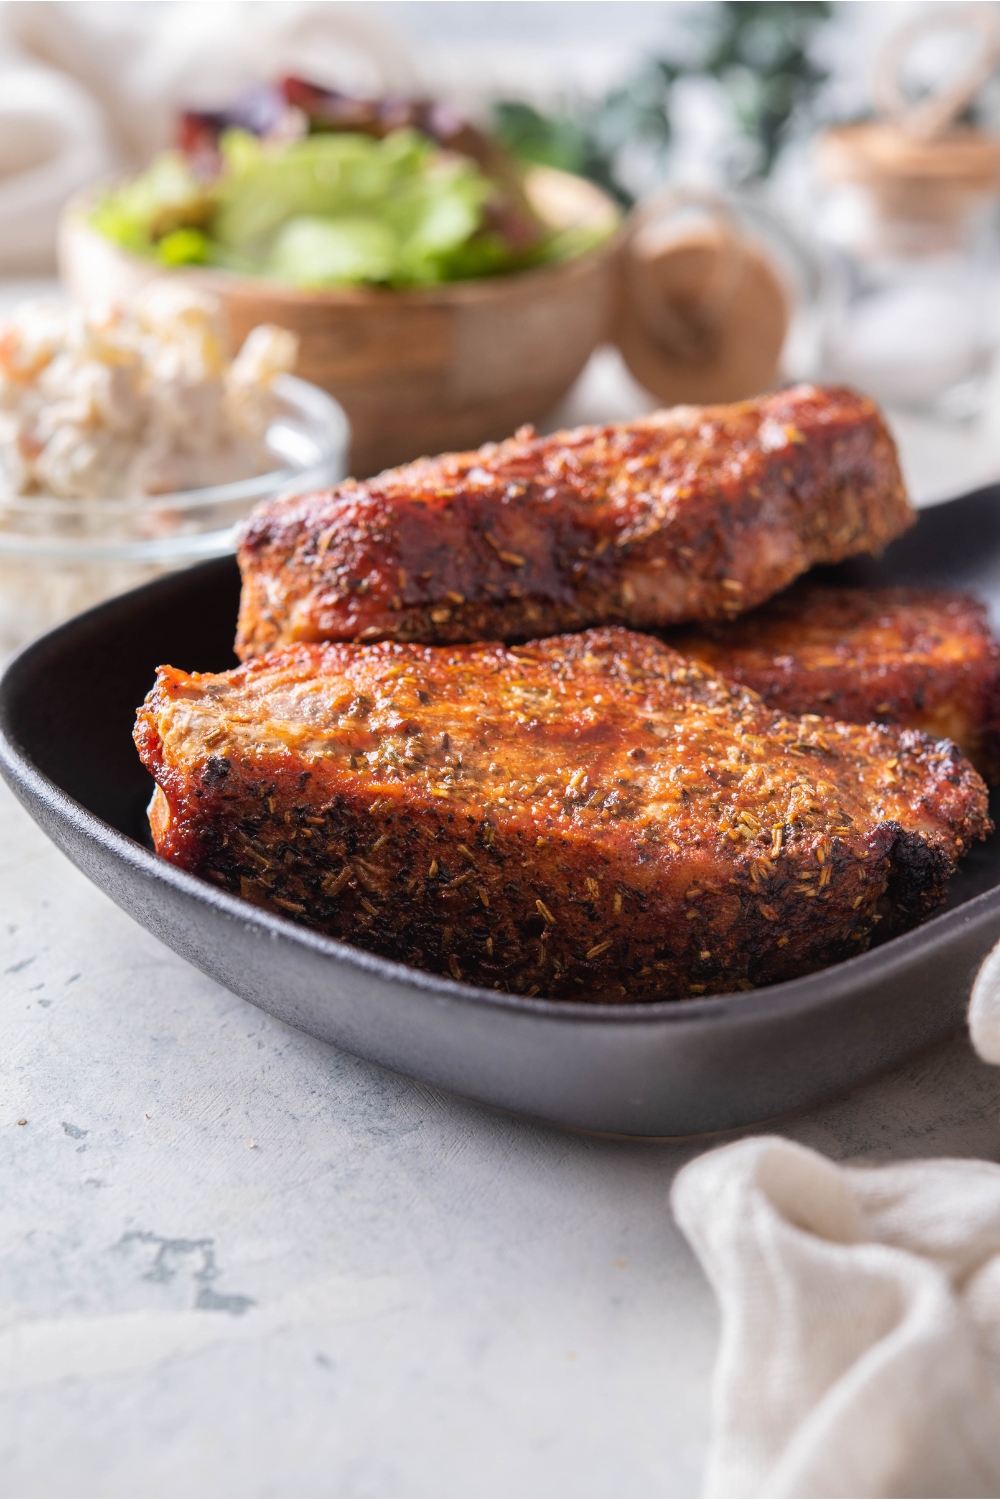 A stack of three seasoned barbecue pork ribs on a black plate.